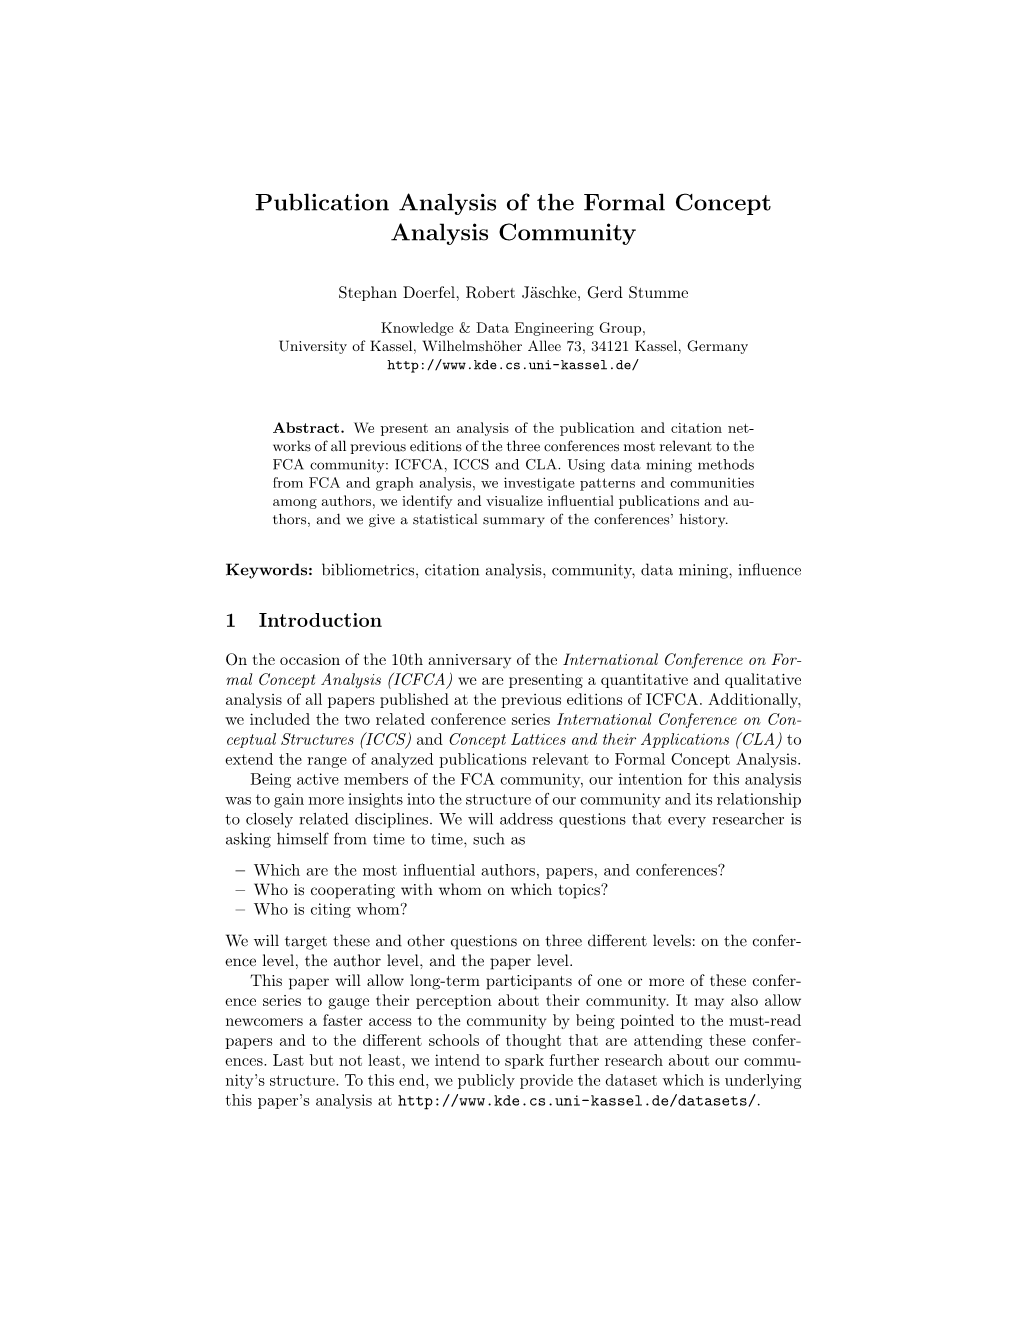 Publication Analysis of the Formal Concept Analysis Community